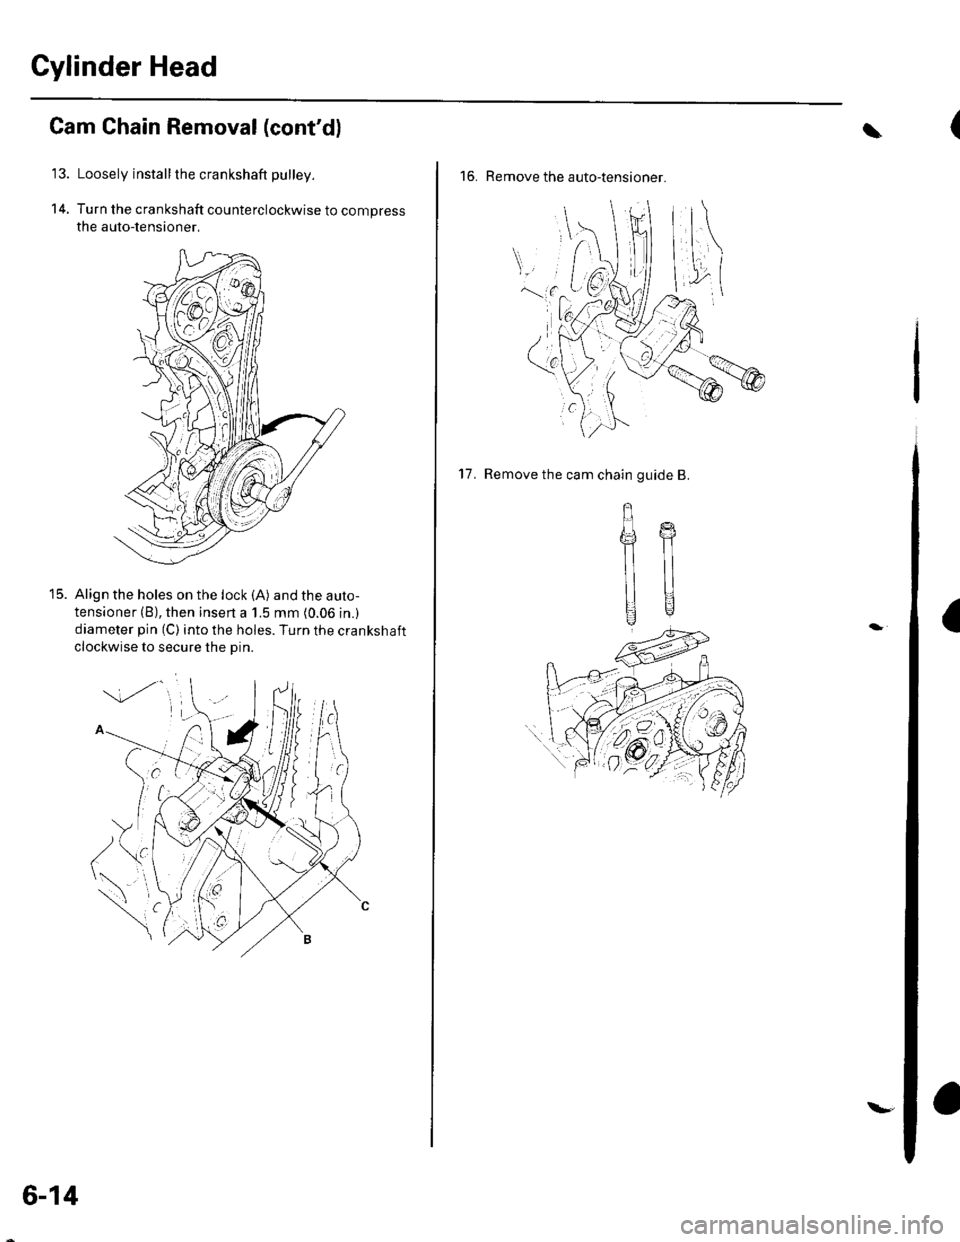 HONDA CIVIC 2003 7.G Workshop Manual Cylinder Head
14.
Cam Chain Removal (contd)
Loosely install the crankshaft pulley.
Turn the crankshaft counterclockwise to compress
the auto-lensioner,
Align the holes on the lock (A) and the auto-
t